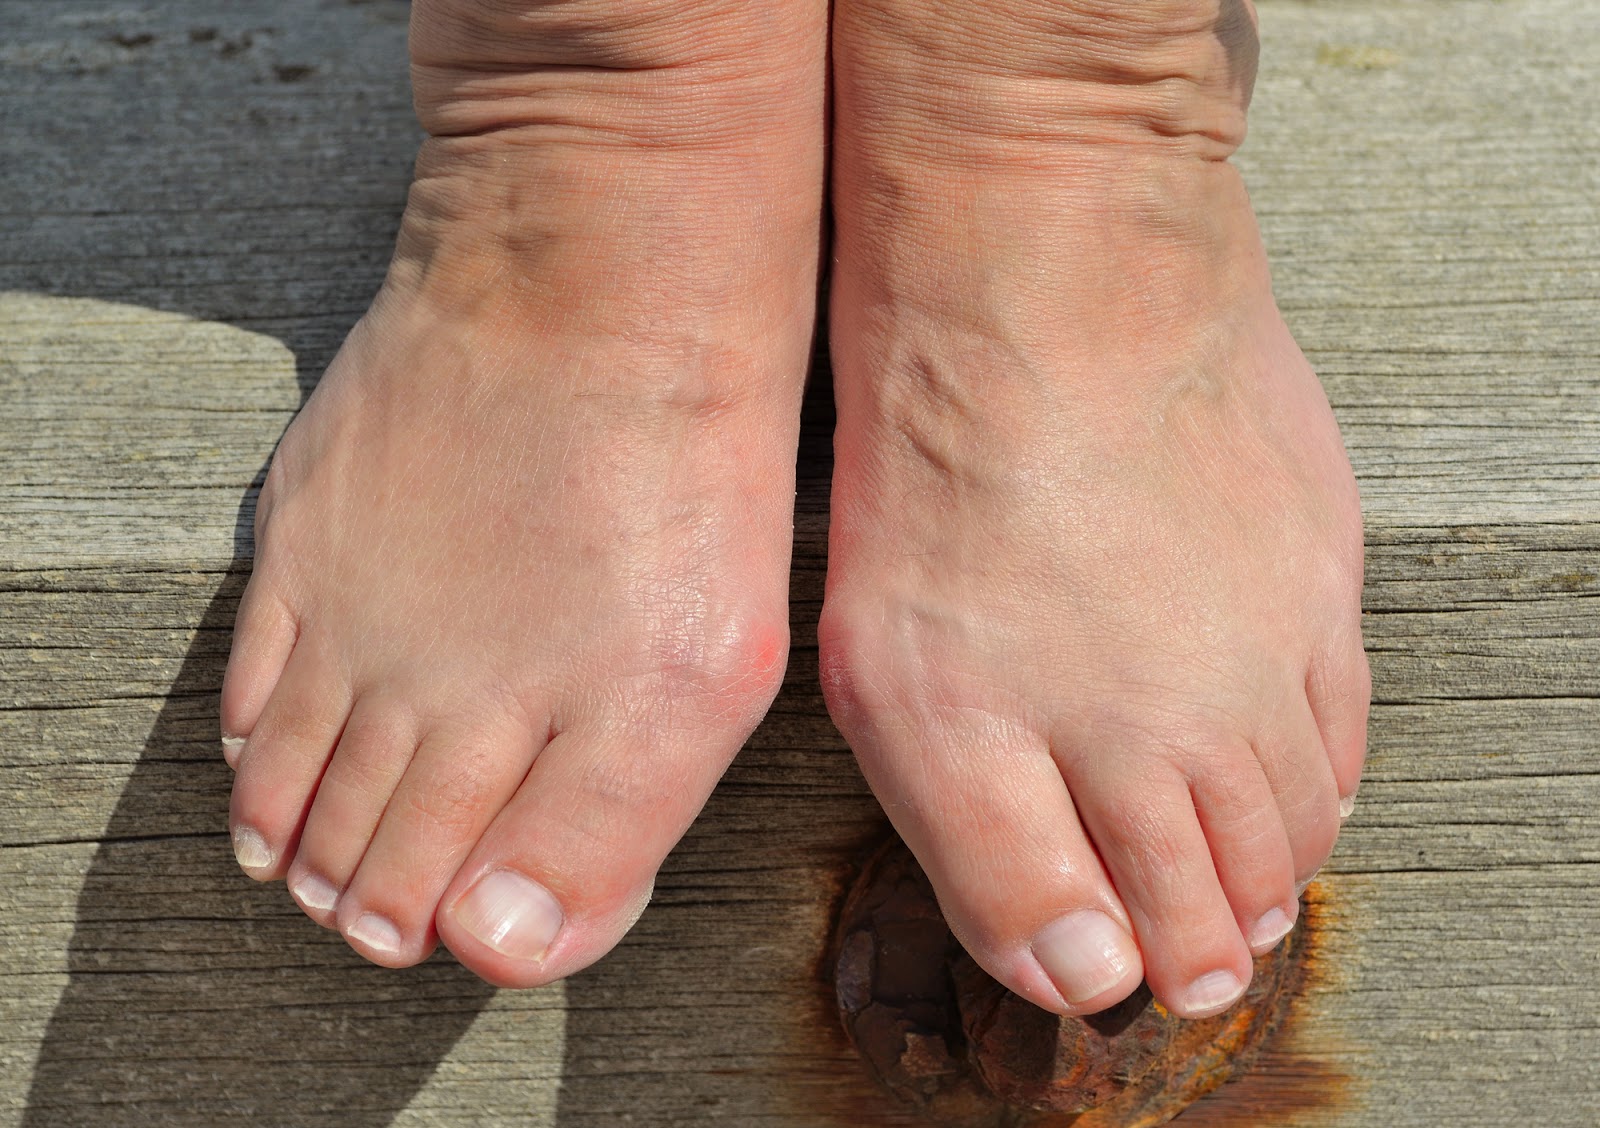 Foot and Ankle Problems By Dr. Richard Blake: Awesome Toes vs